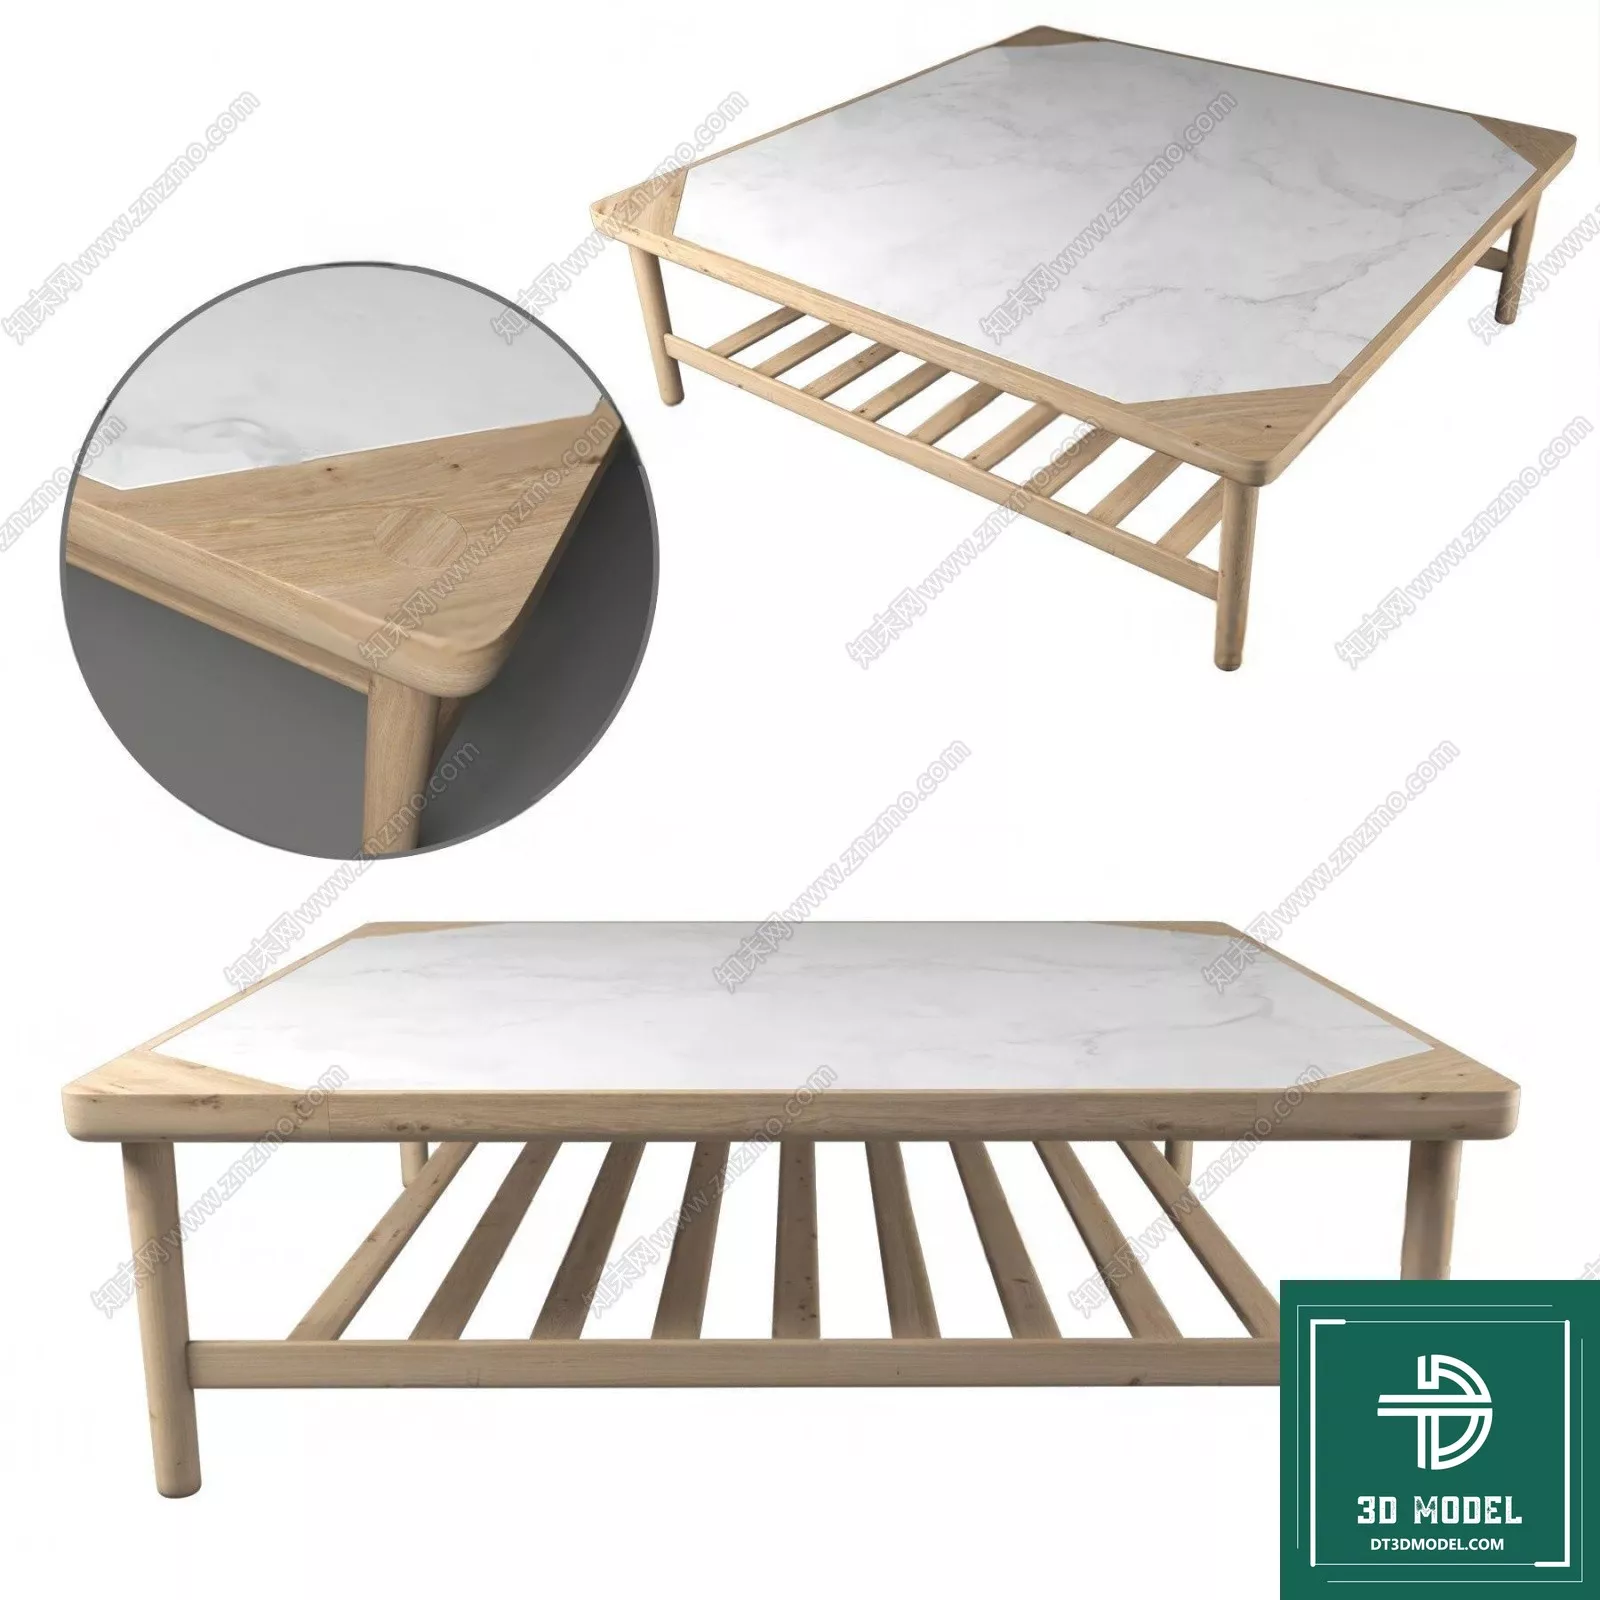 MODERN TEA TABLE - SKETCHUP 3D MODEL - VRAY OR ENSCAPE - ID14904